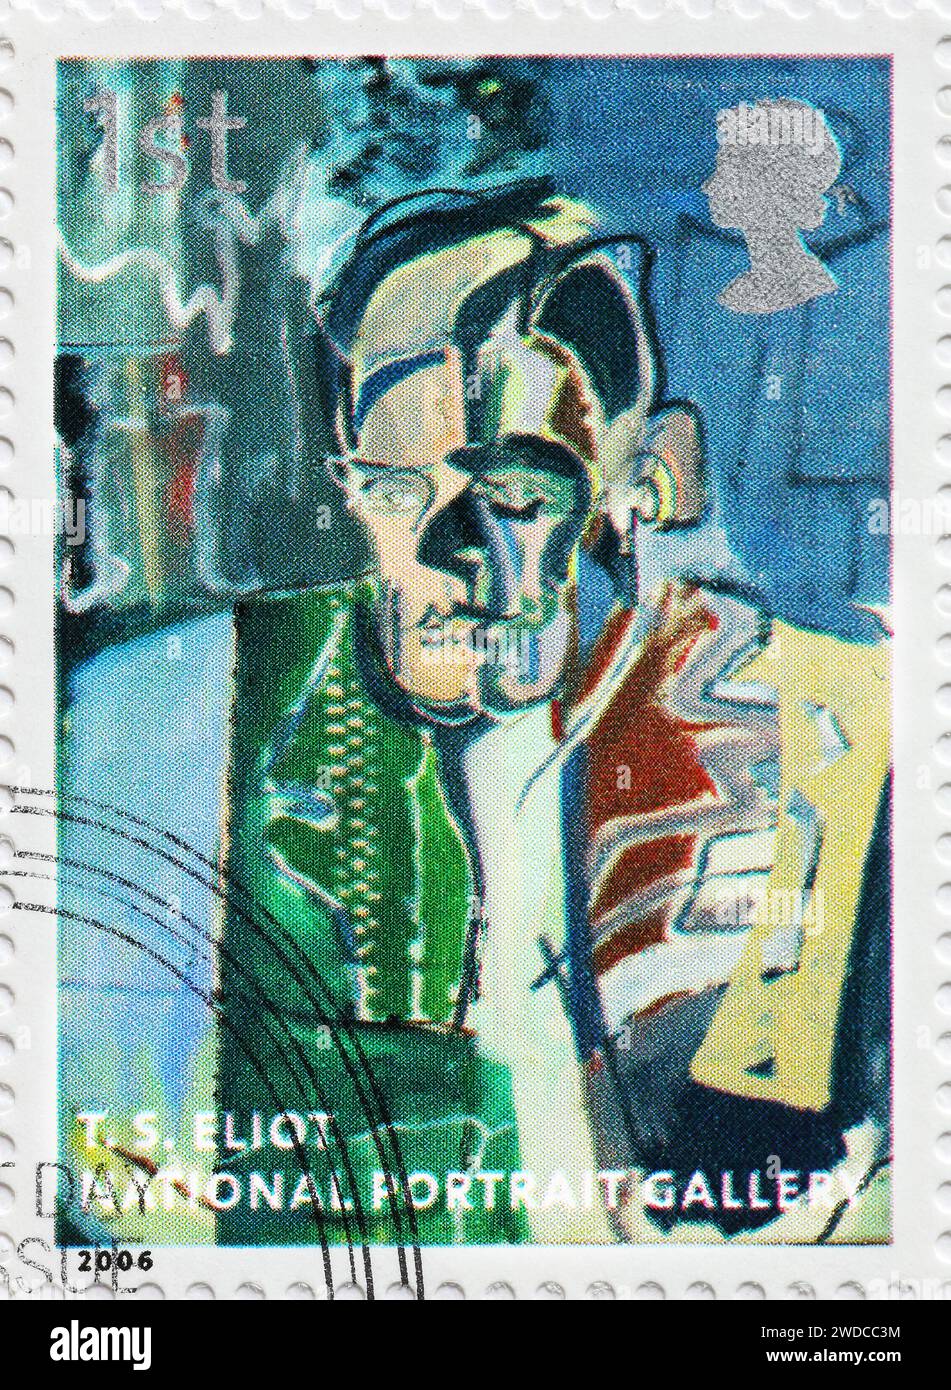 Thomas Stern Eliot from the National Portrait Gallery on postage stamp Stock Photo